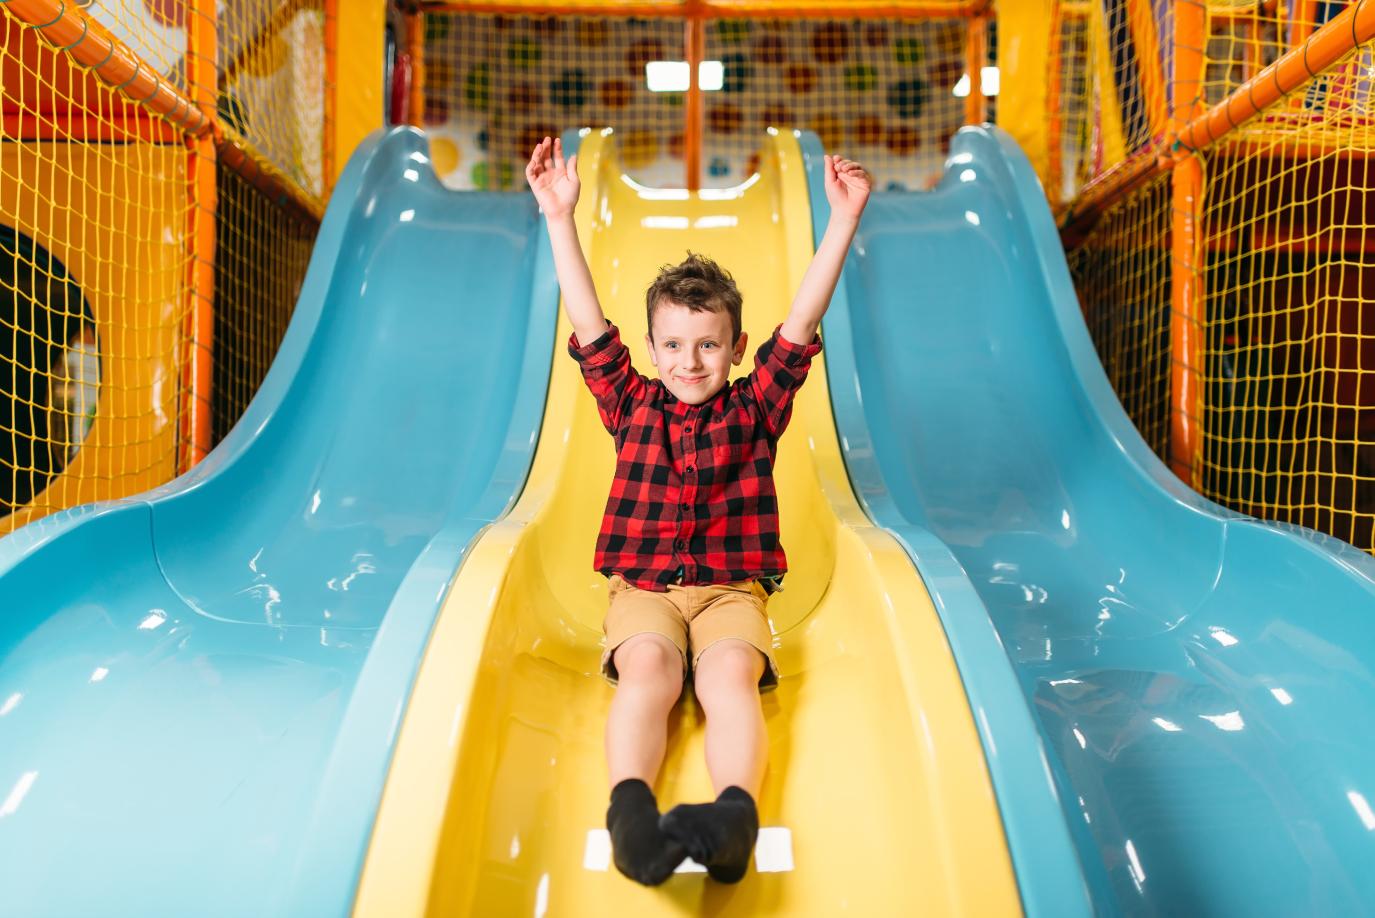 Young smiling boy sliding down an indoor slide with his arms in the air